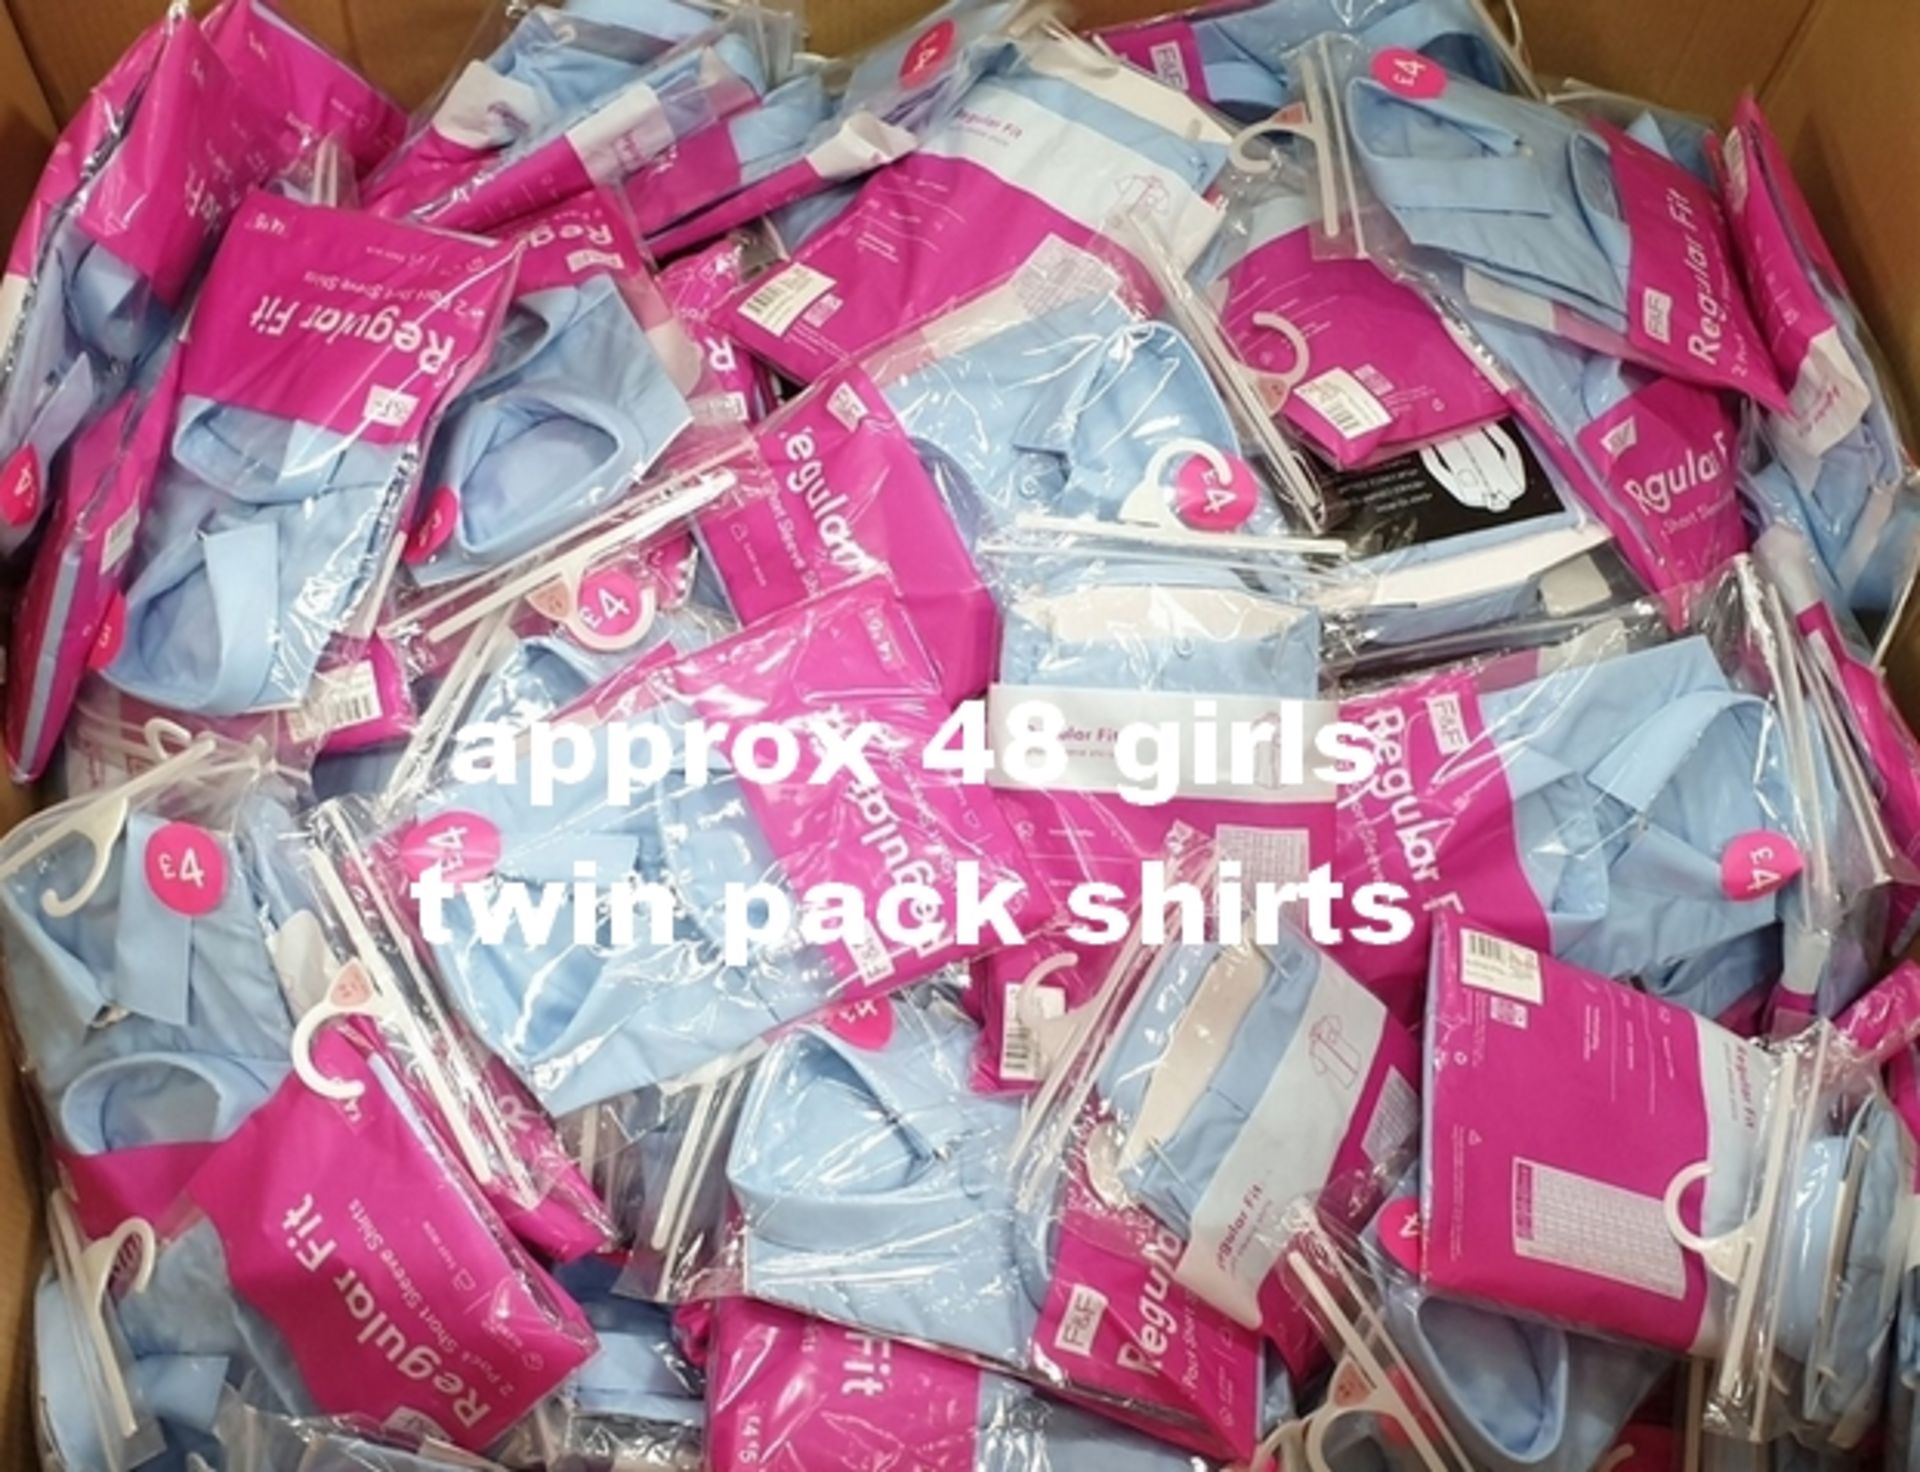 48 mixed girls and boys twin packs of shirts sizes from 5 to 13. - Image 2 of 3